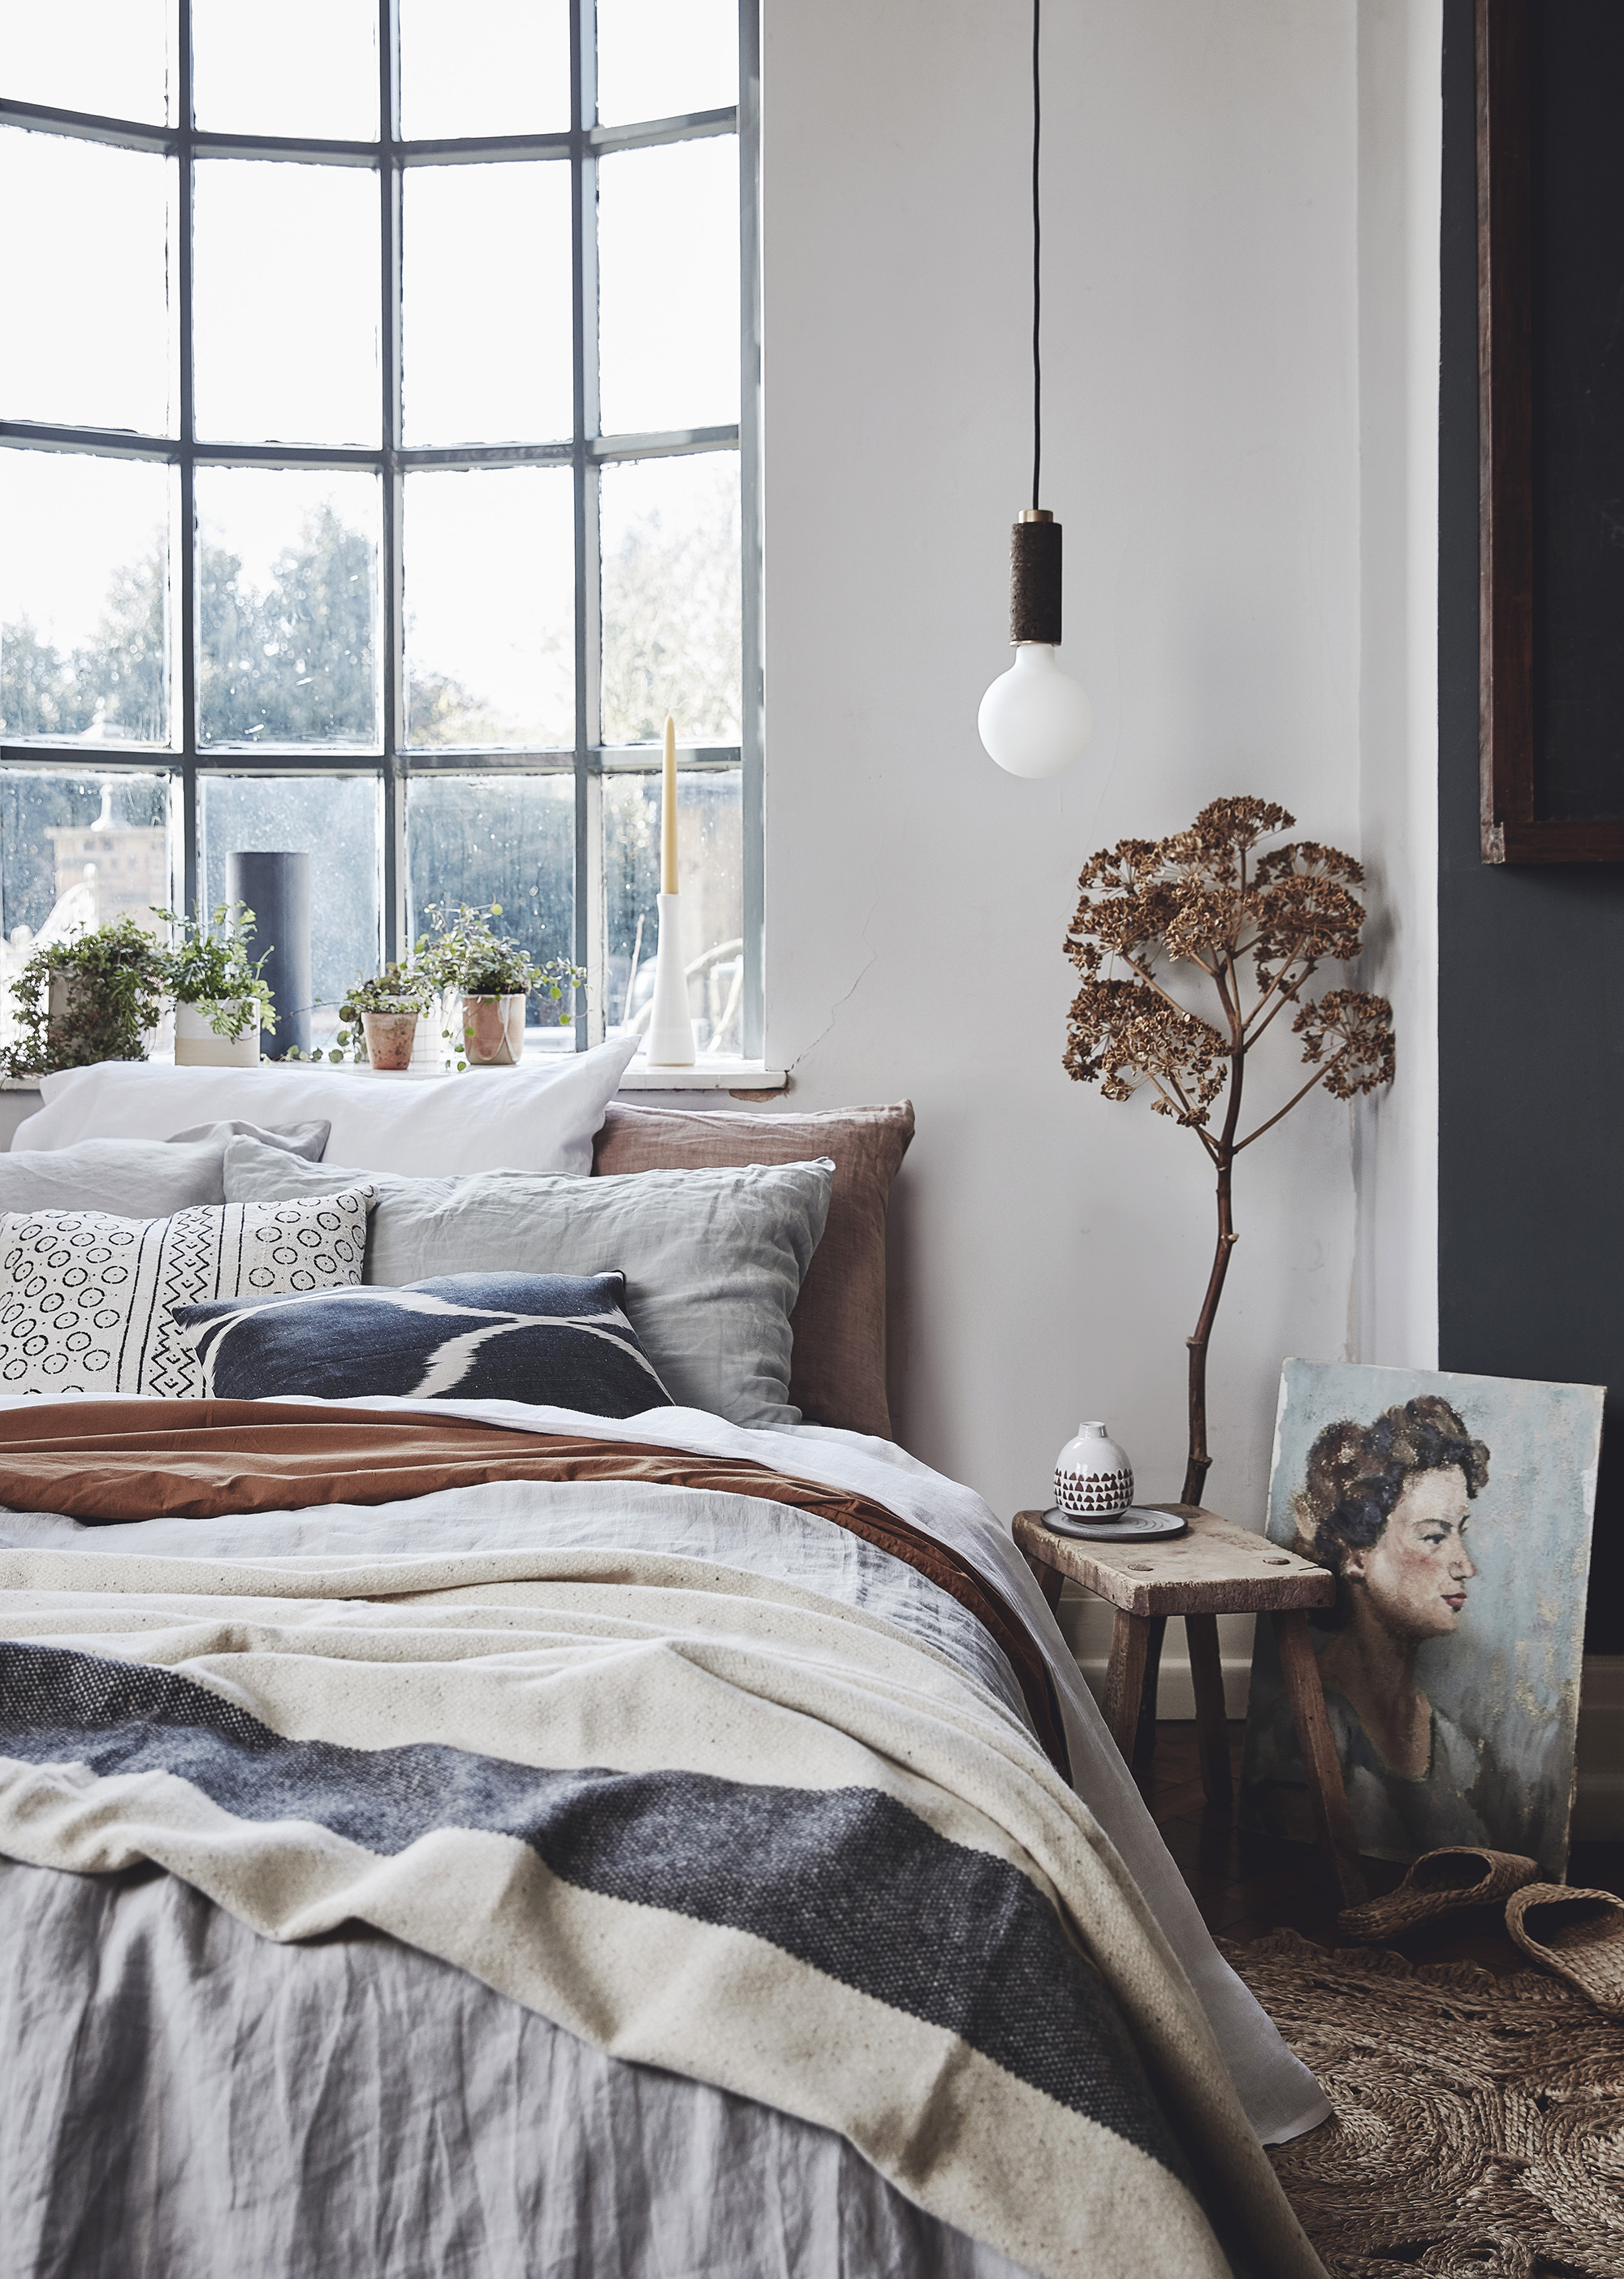 Grey 100% linen bedding – Soak and Sleep; Terracotta organic cotton bedding – H&M Home; Seagrass rug – Armadillo; Handwoven grass slippers – Yonder Living; Blanket – The London Cloth Company; Lighting – Nove Lighting; Cushion in foreground – Por…